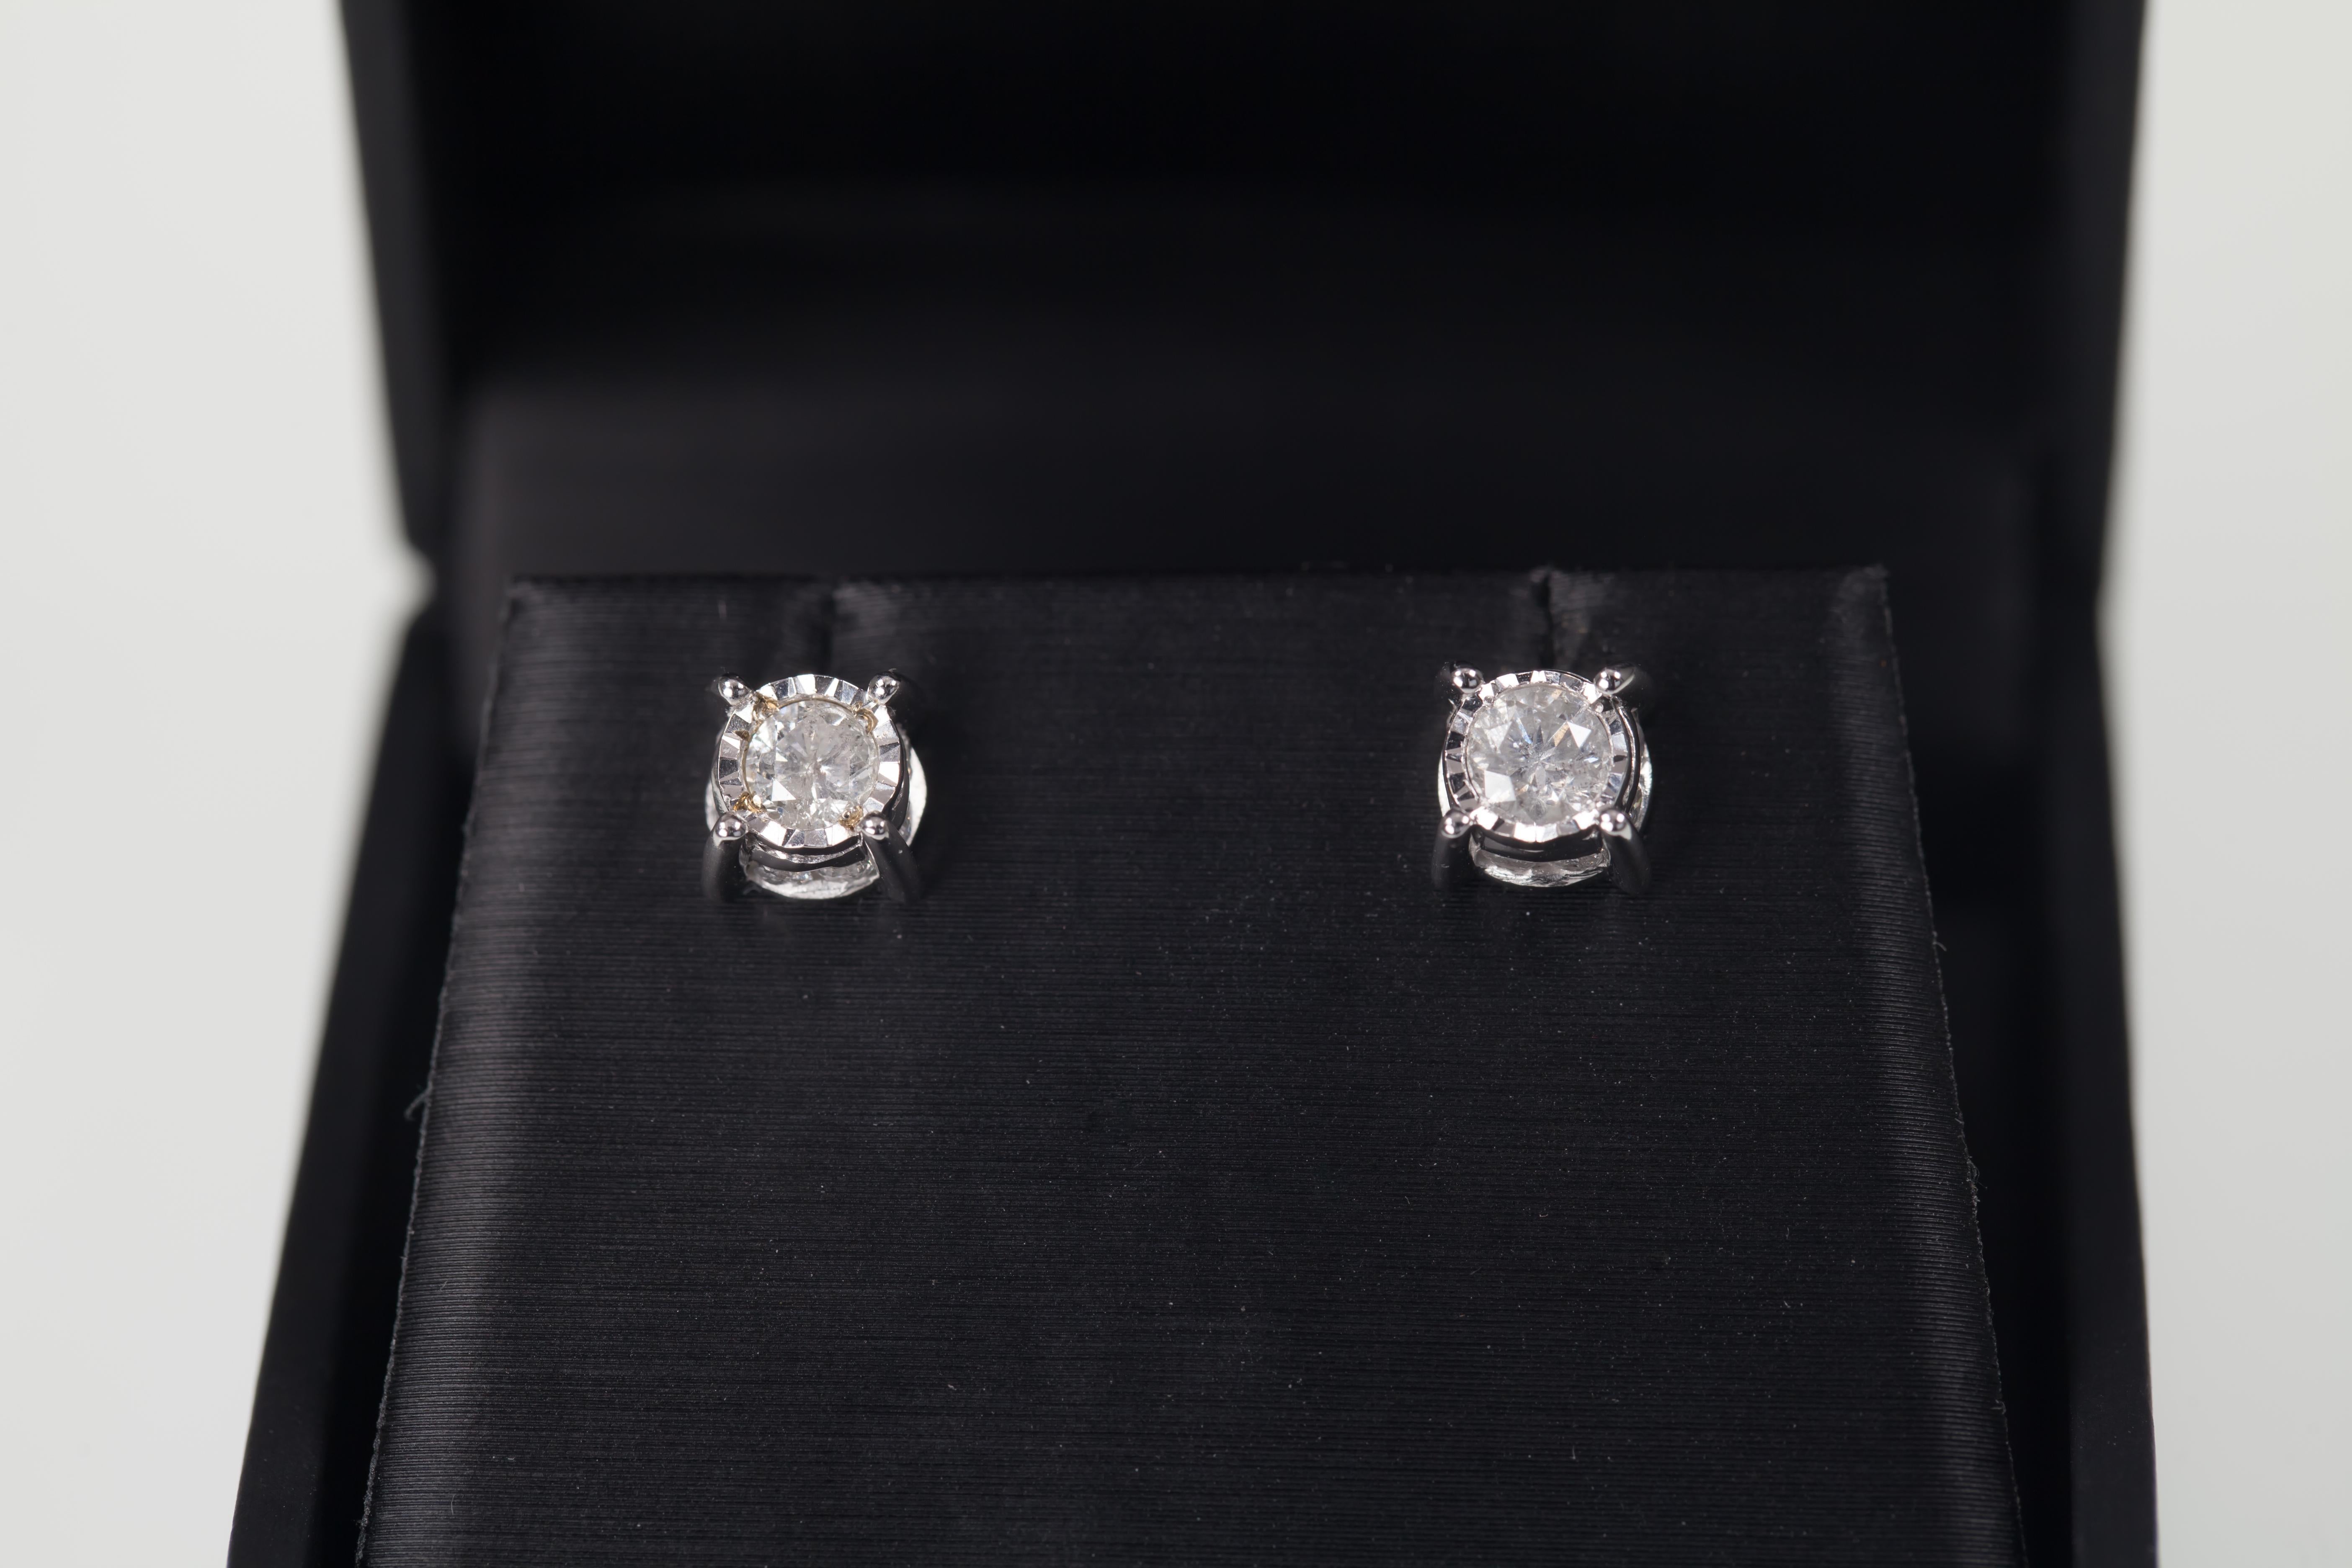 Gorgeous Stud Earrings
Feature 0.44 Cts Round Diamonds
Average Color = H
Average Clarity = I1
16 Accent Stones on Sides
Total Weight of Accent Stones = 0.32 Cts
Total Mass = 1.9 grams
Gorgeous Gift!